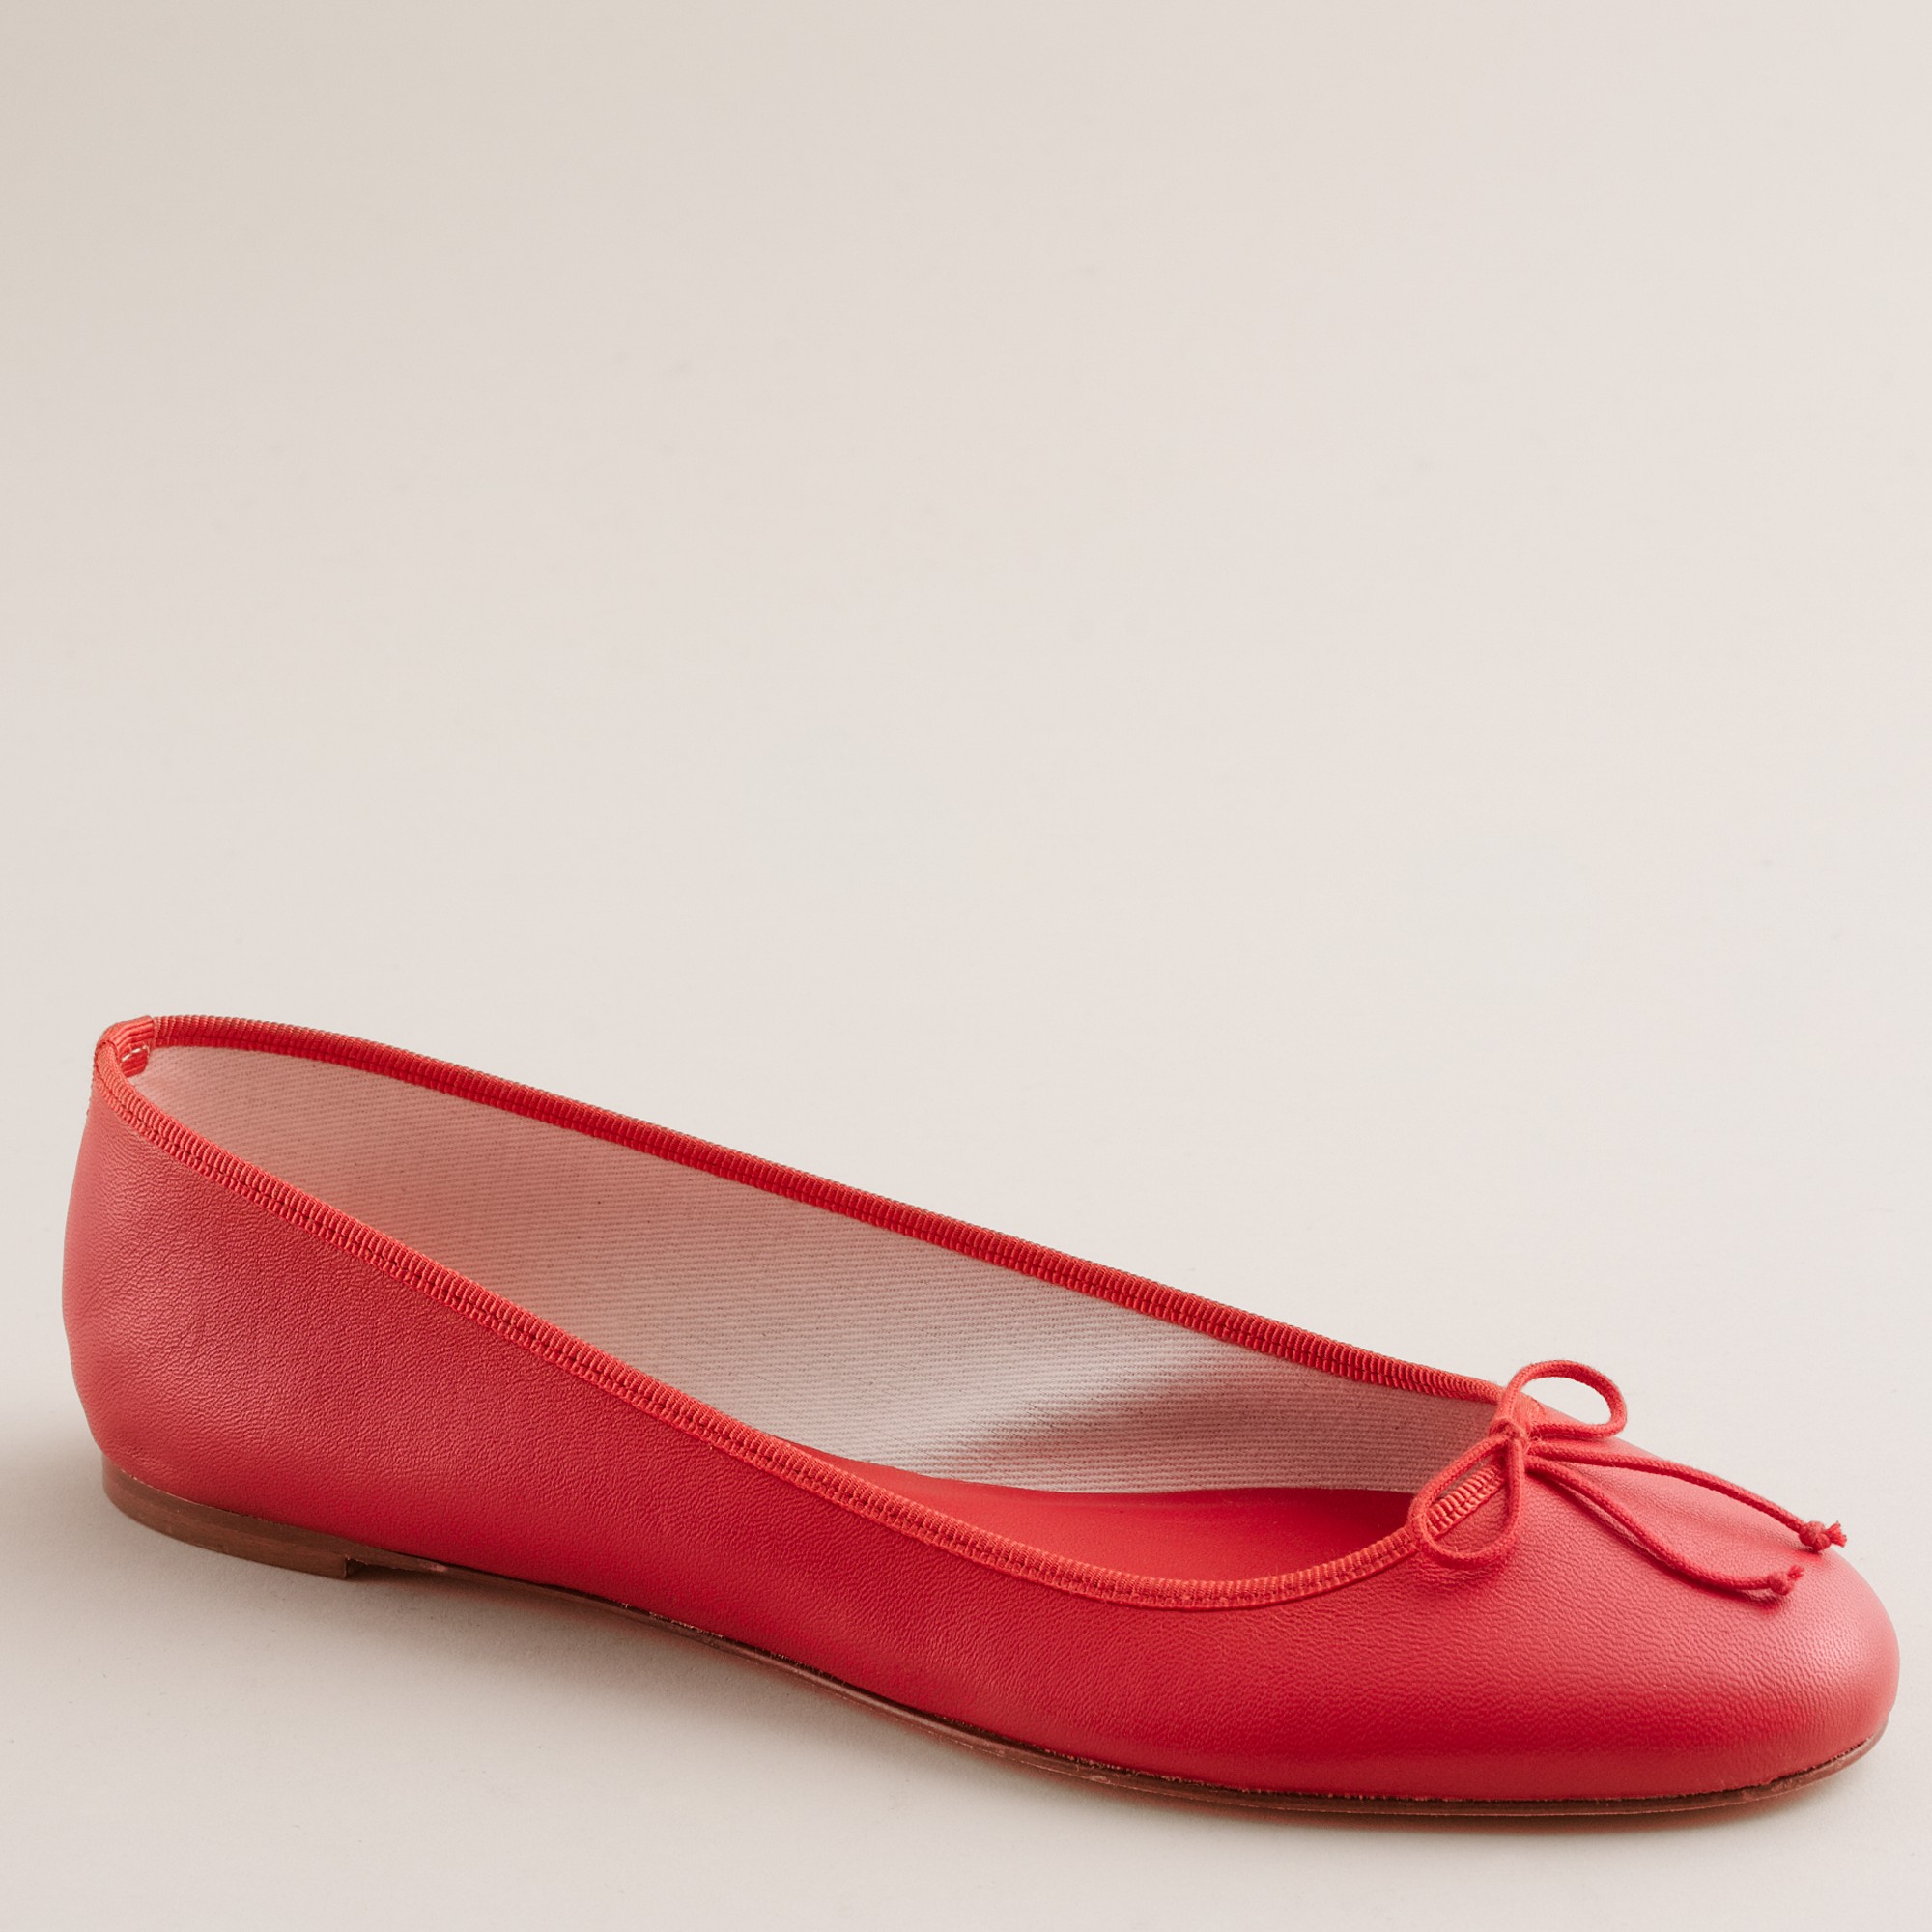 J.crew Classic Leather Ballet Flats in Red | Lyst